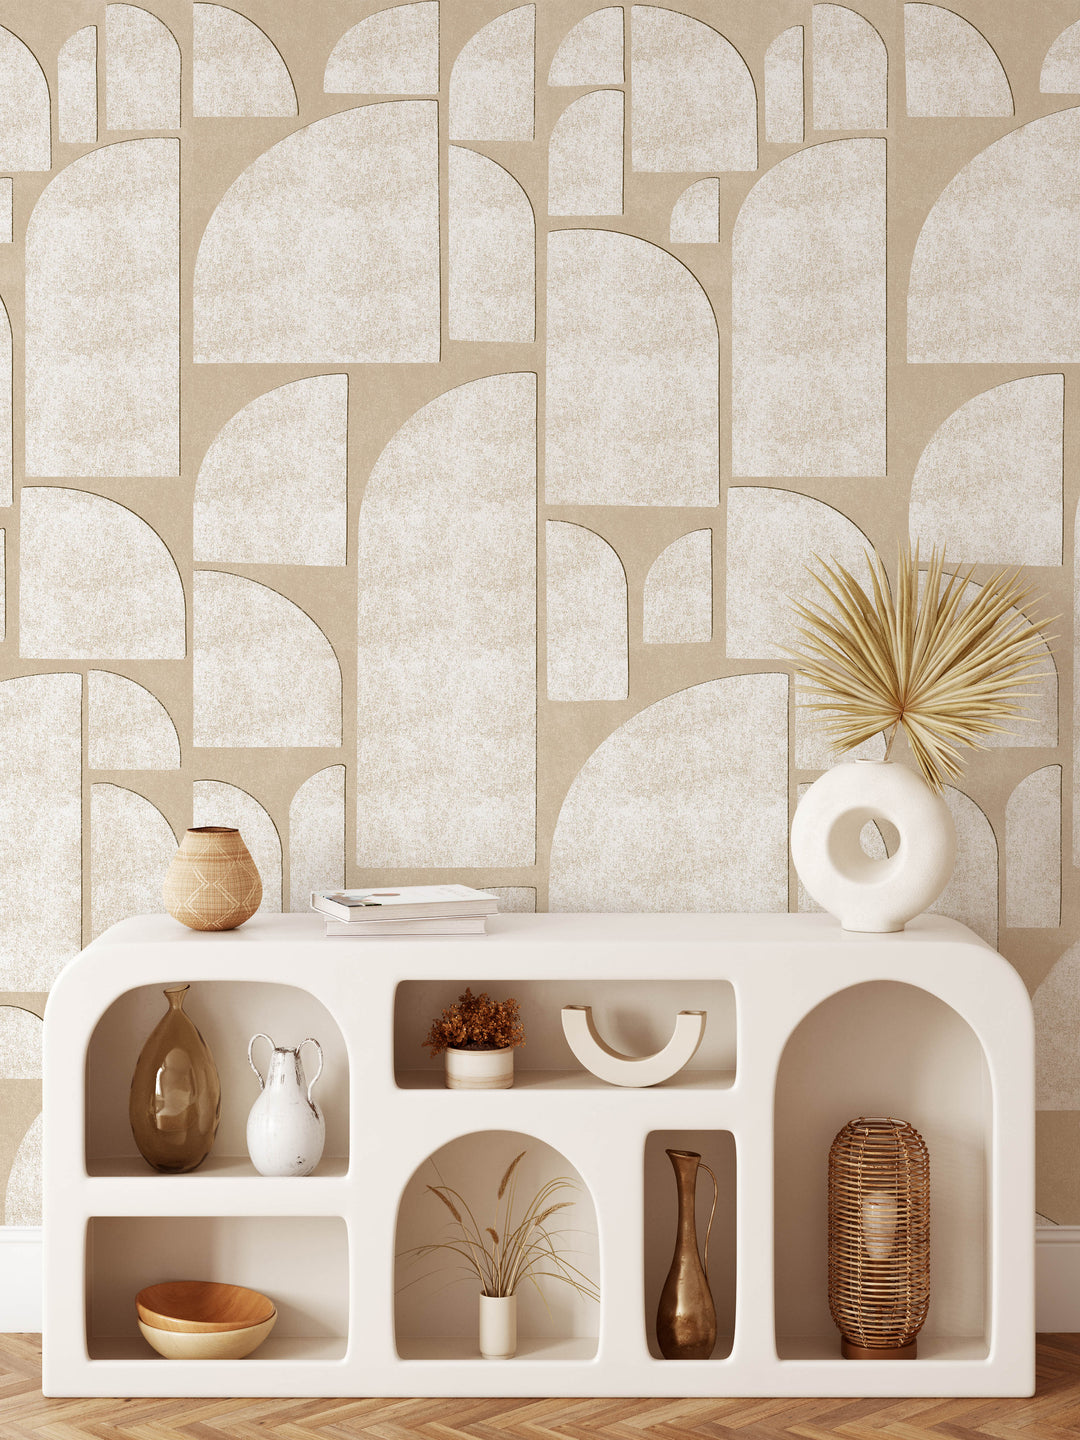 Abstract Geometric Semi Arch Shapes Mural in Neutral and White